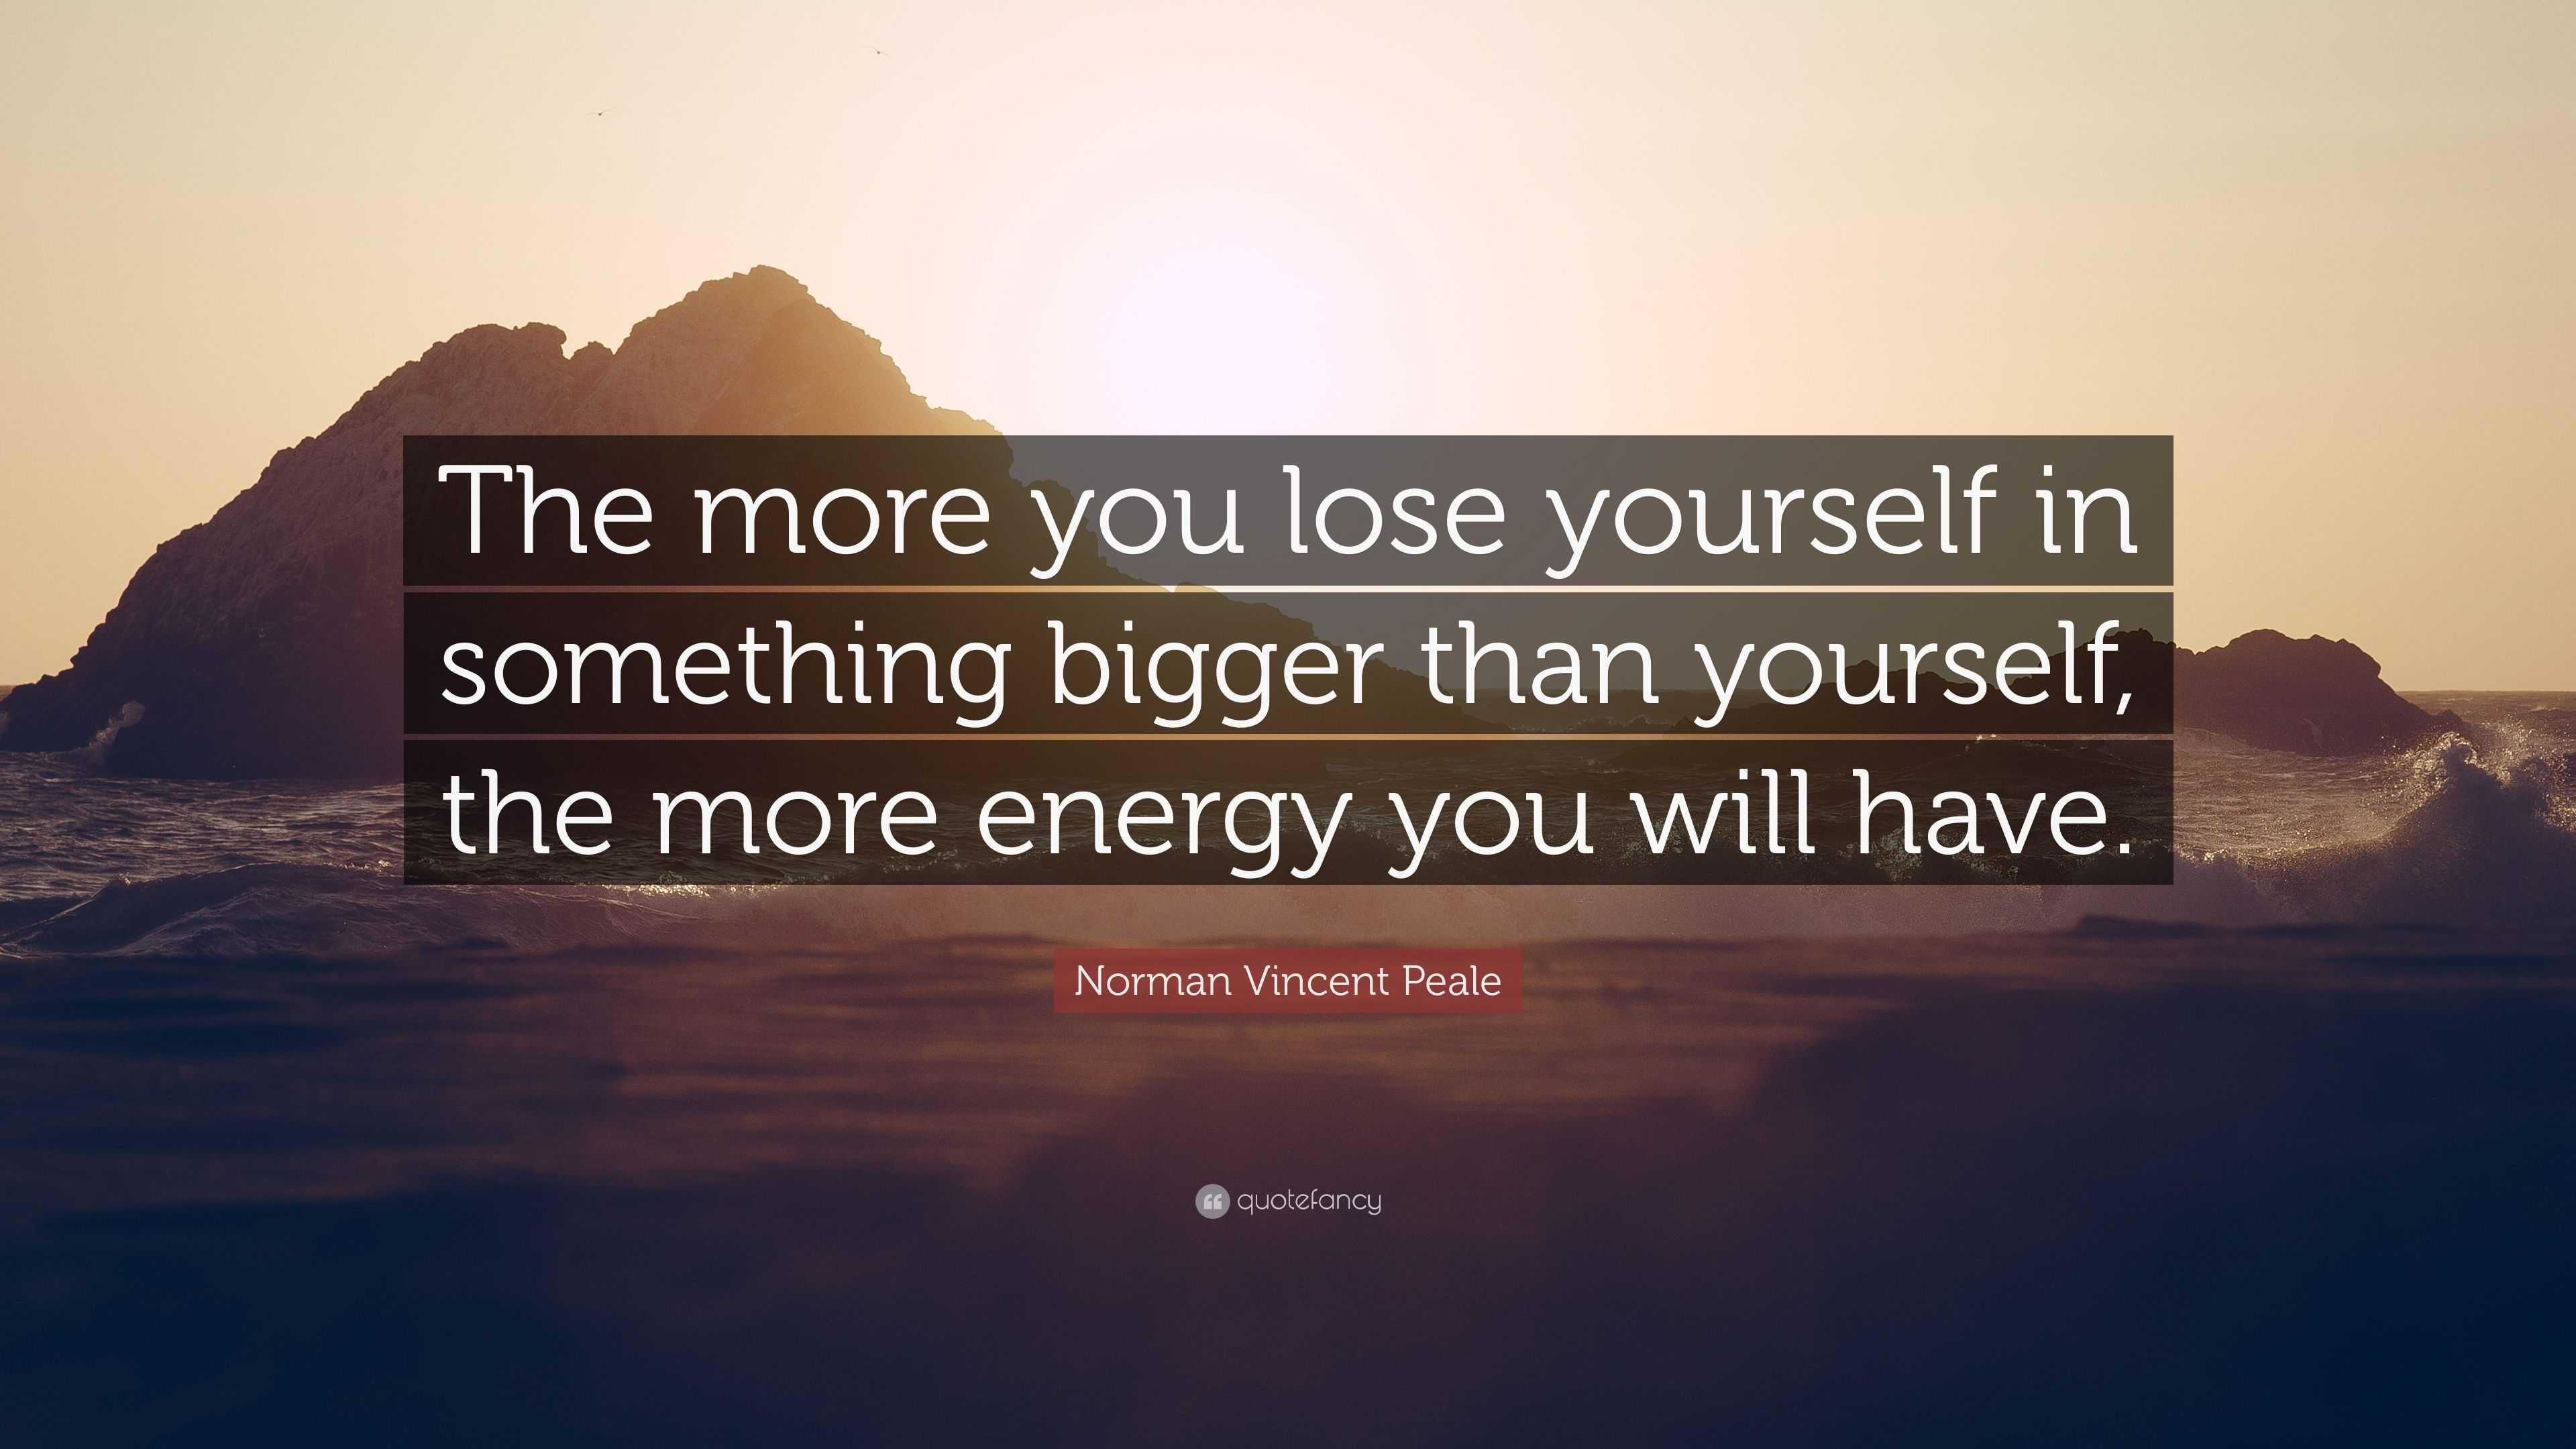 Norman Vincent Peale Quote: "The more you lose yourself in something bigger than yourself, the ...